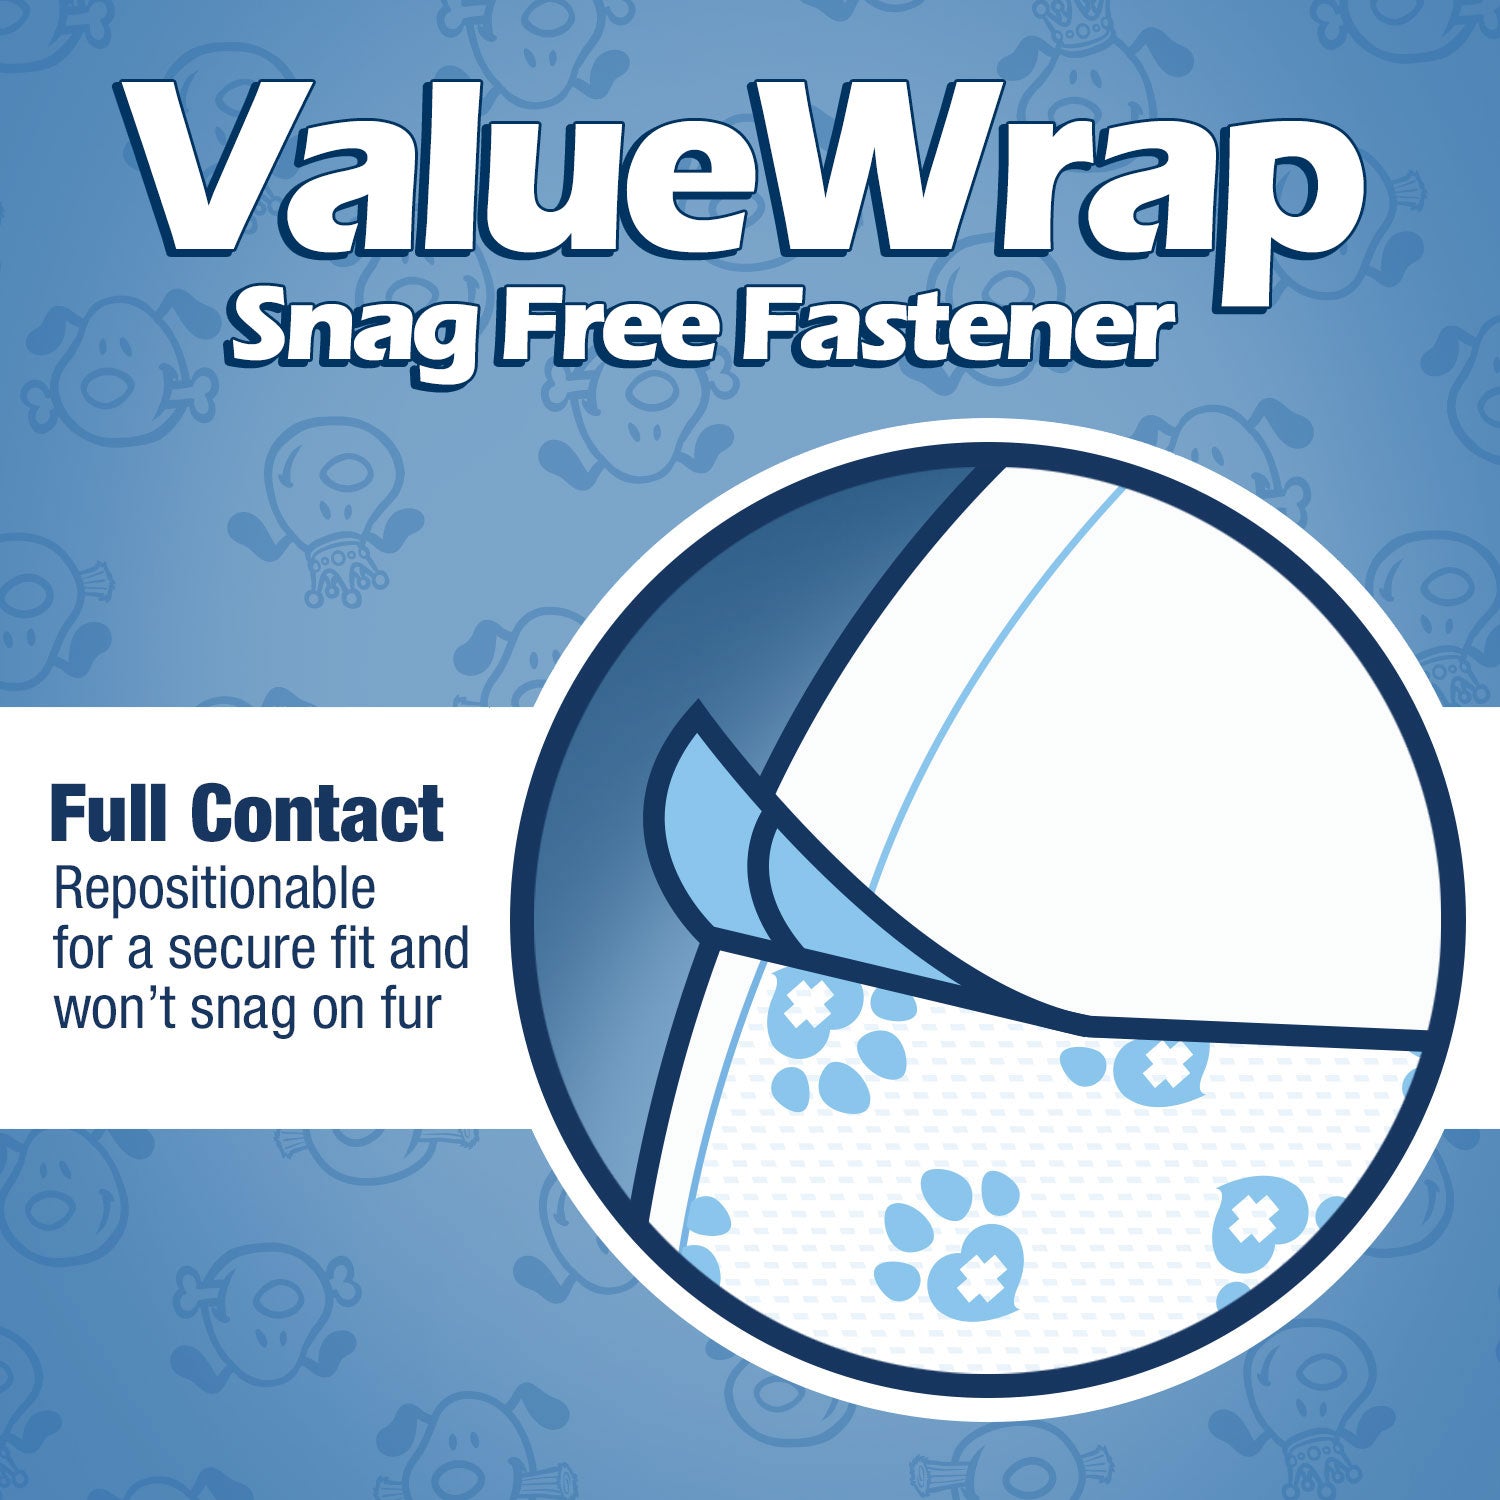 NEW- ValueWrap Male Wraps, Disposable Dog Diapers, 1-Tab Large, Lavender, 72 Count